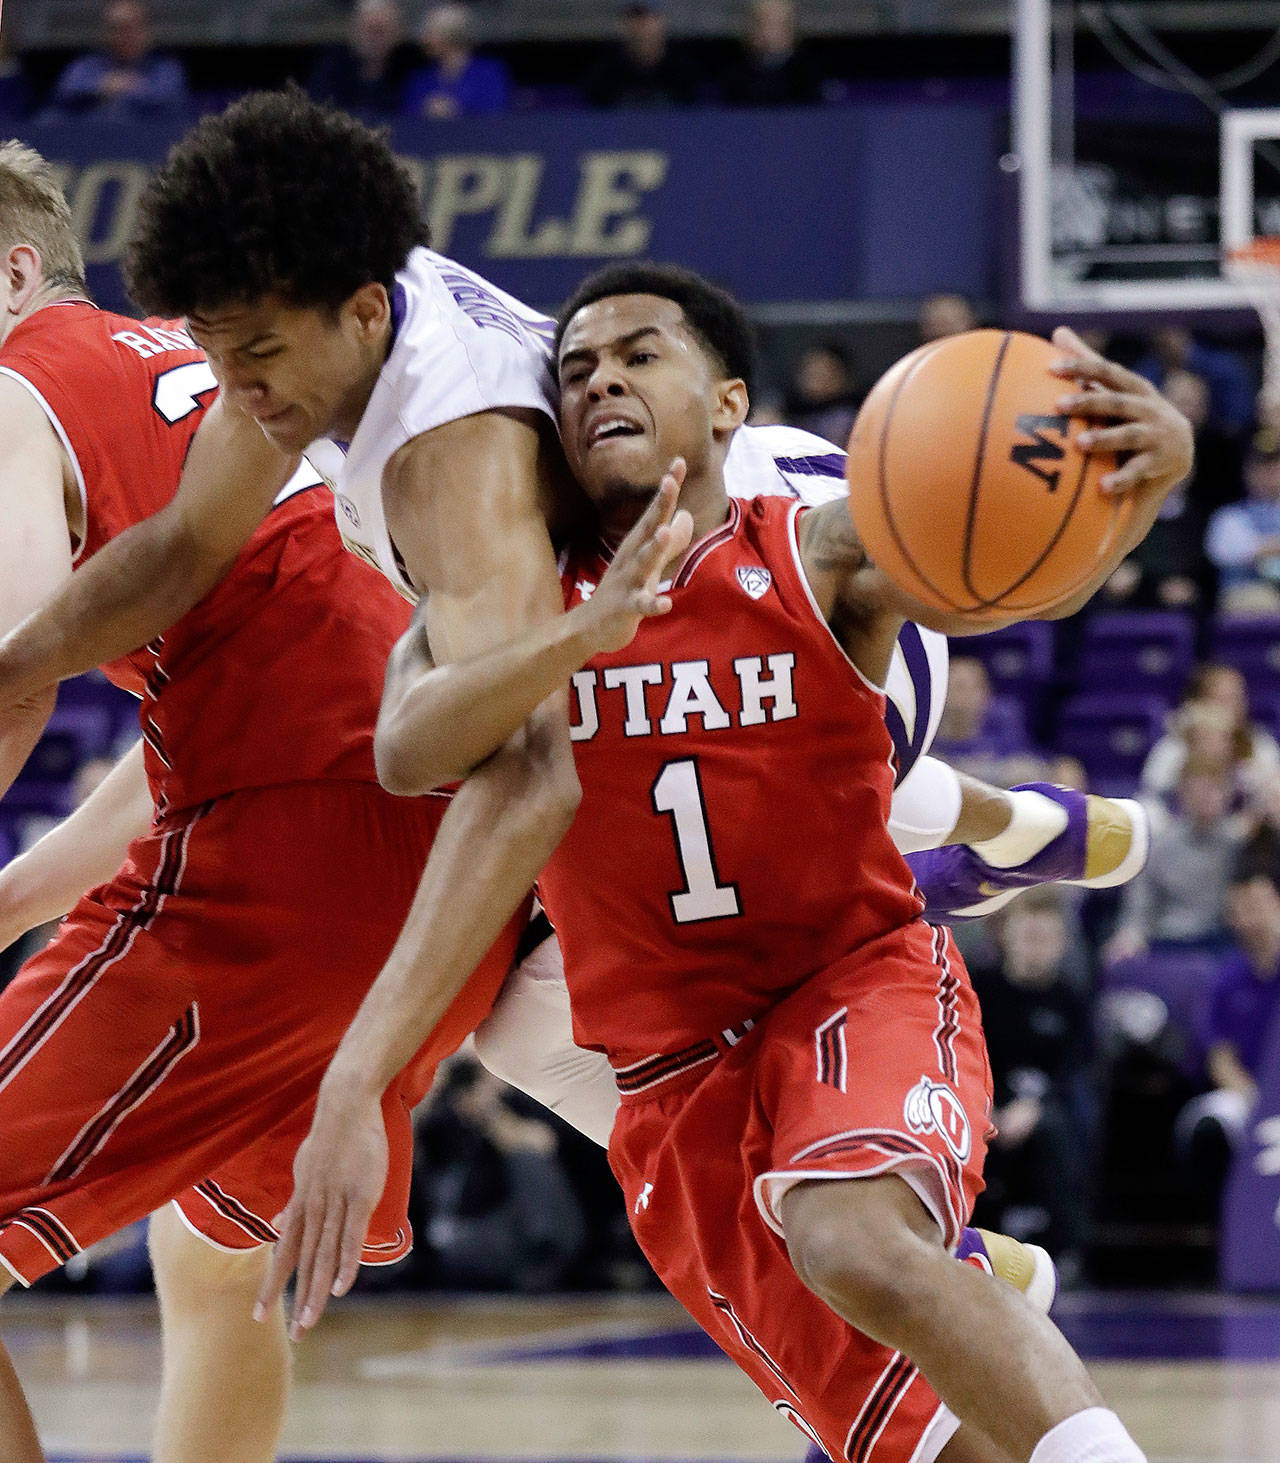 Washington’s Matisse Thybulle (center) flips up behind Utah’s Justin Bibbins (1) after being fouled by Tyler Rawson (left) during the first half of a game Feb. 15, 2018, in Seattle. (AP Photo/Elaine Thompson)